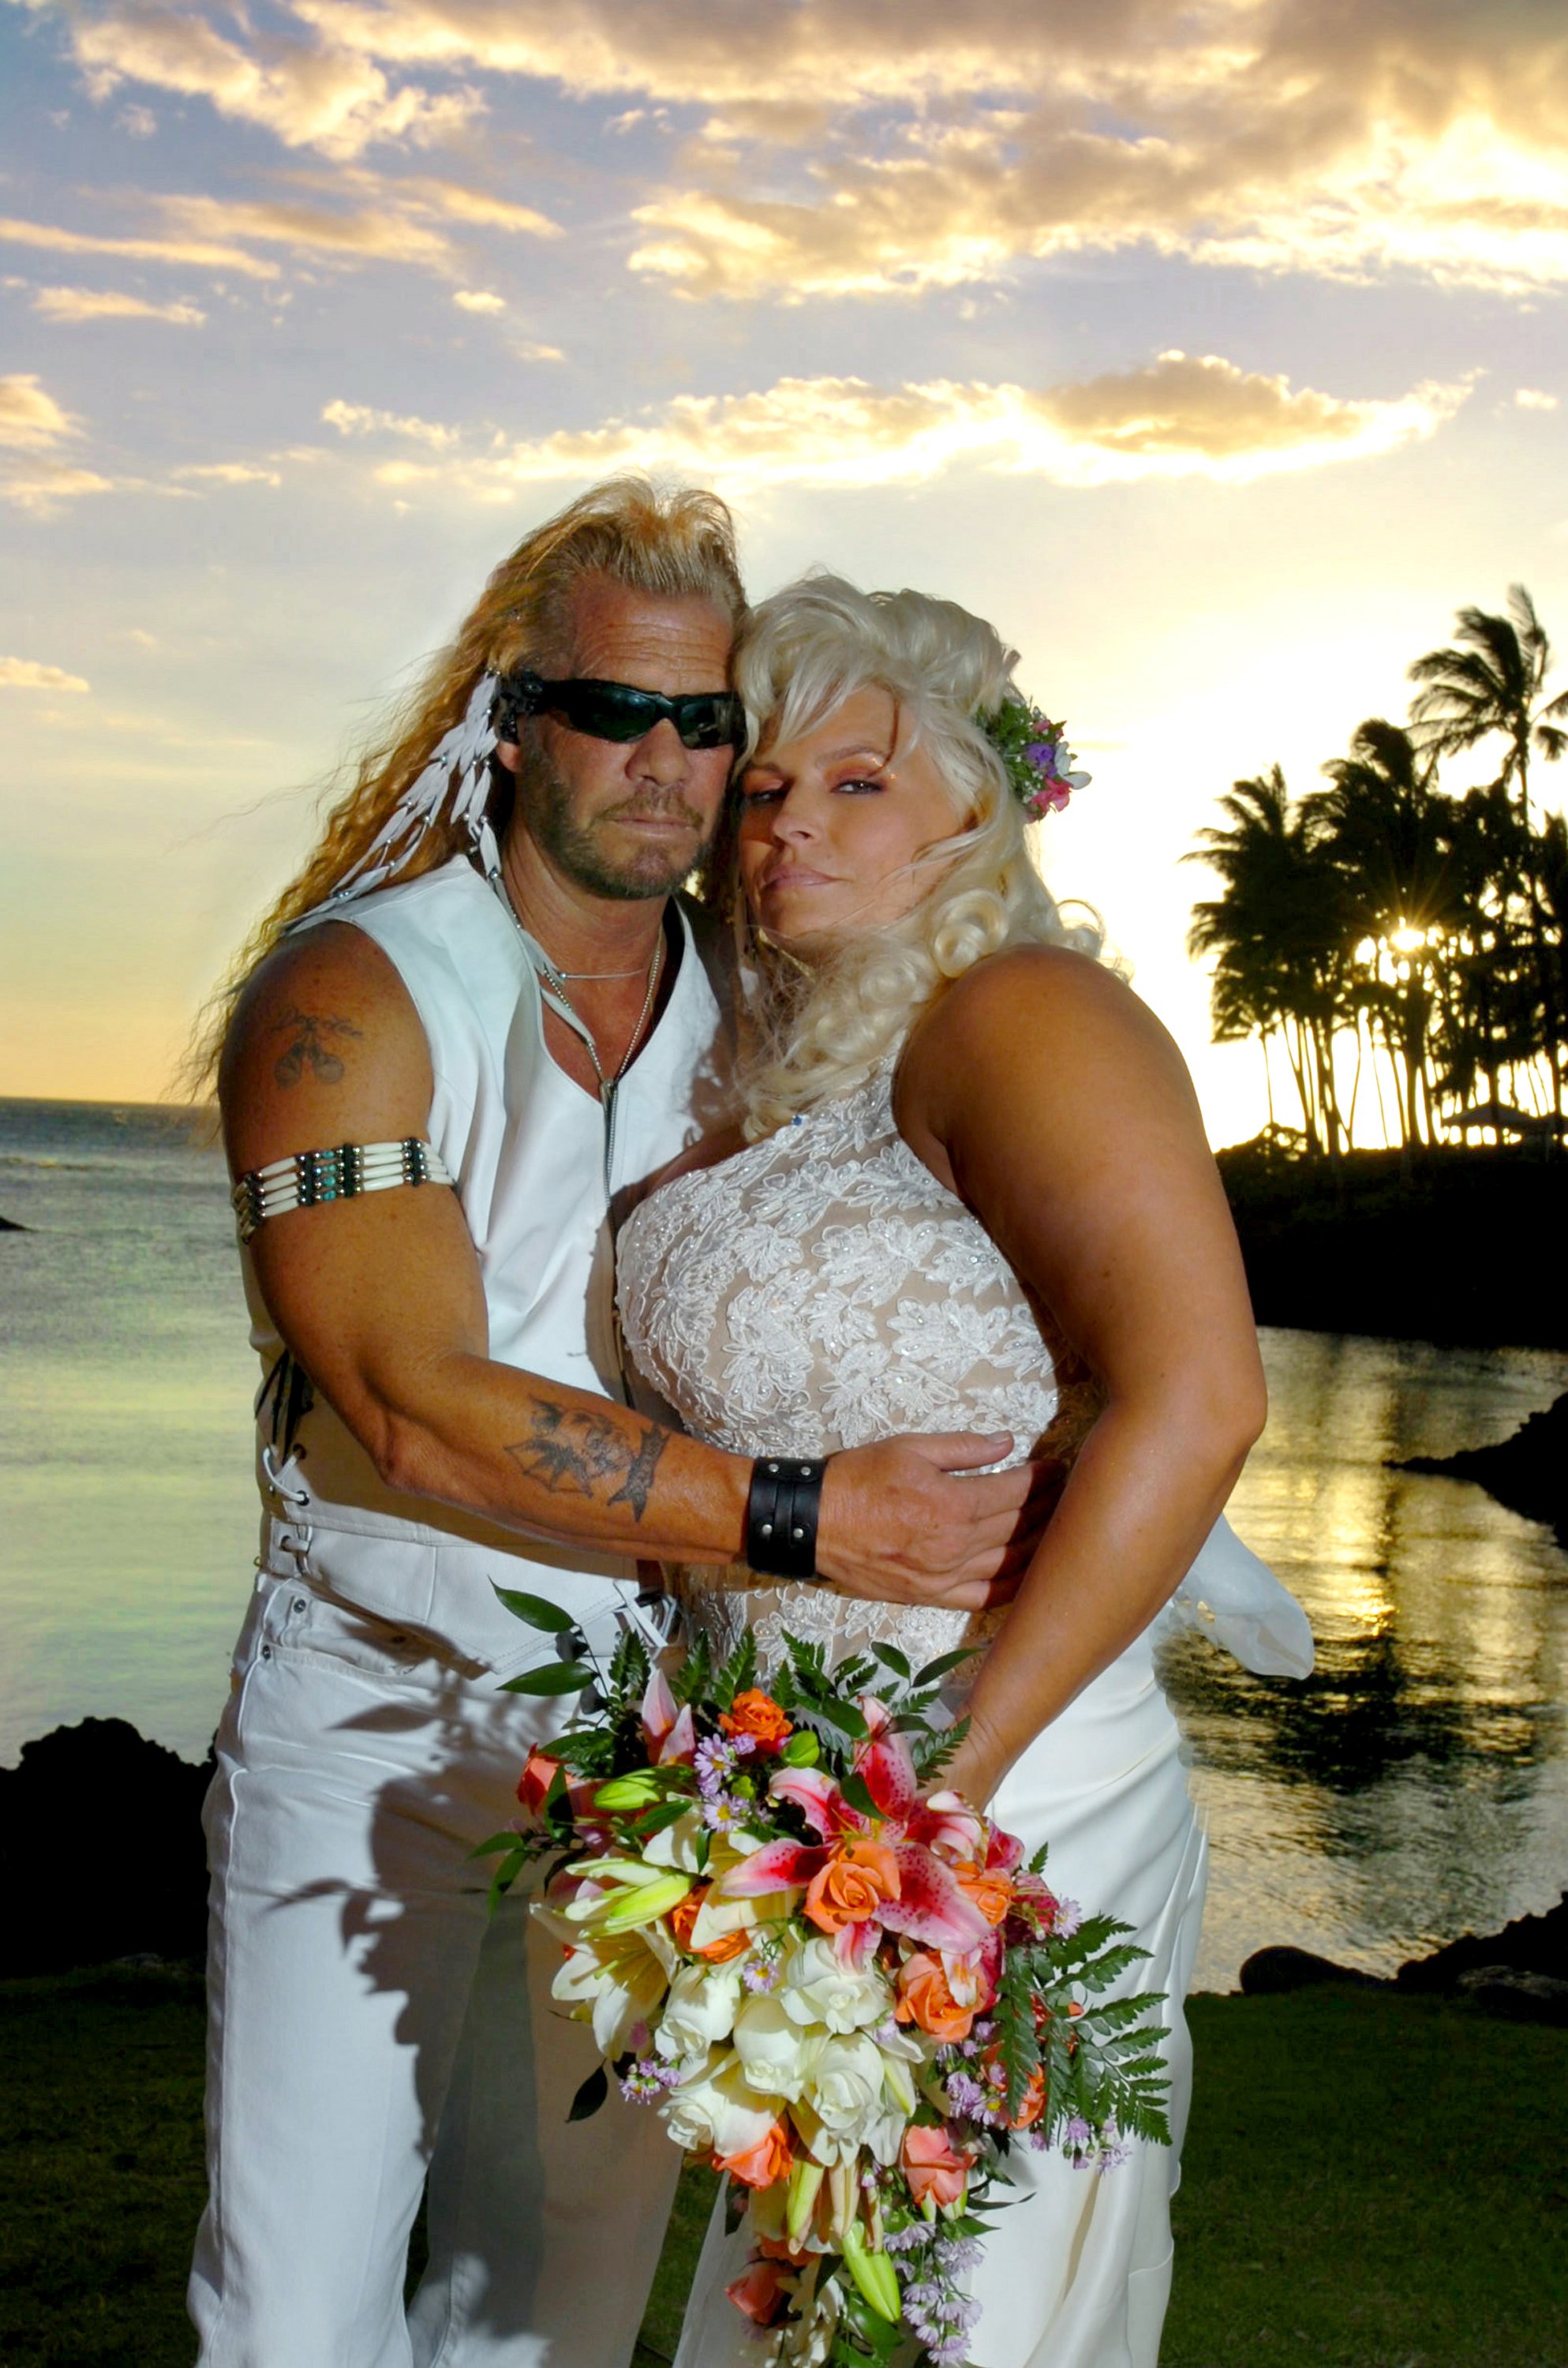 Dog and Beth at their wedding in 2006. | Photo: Getty Images